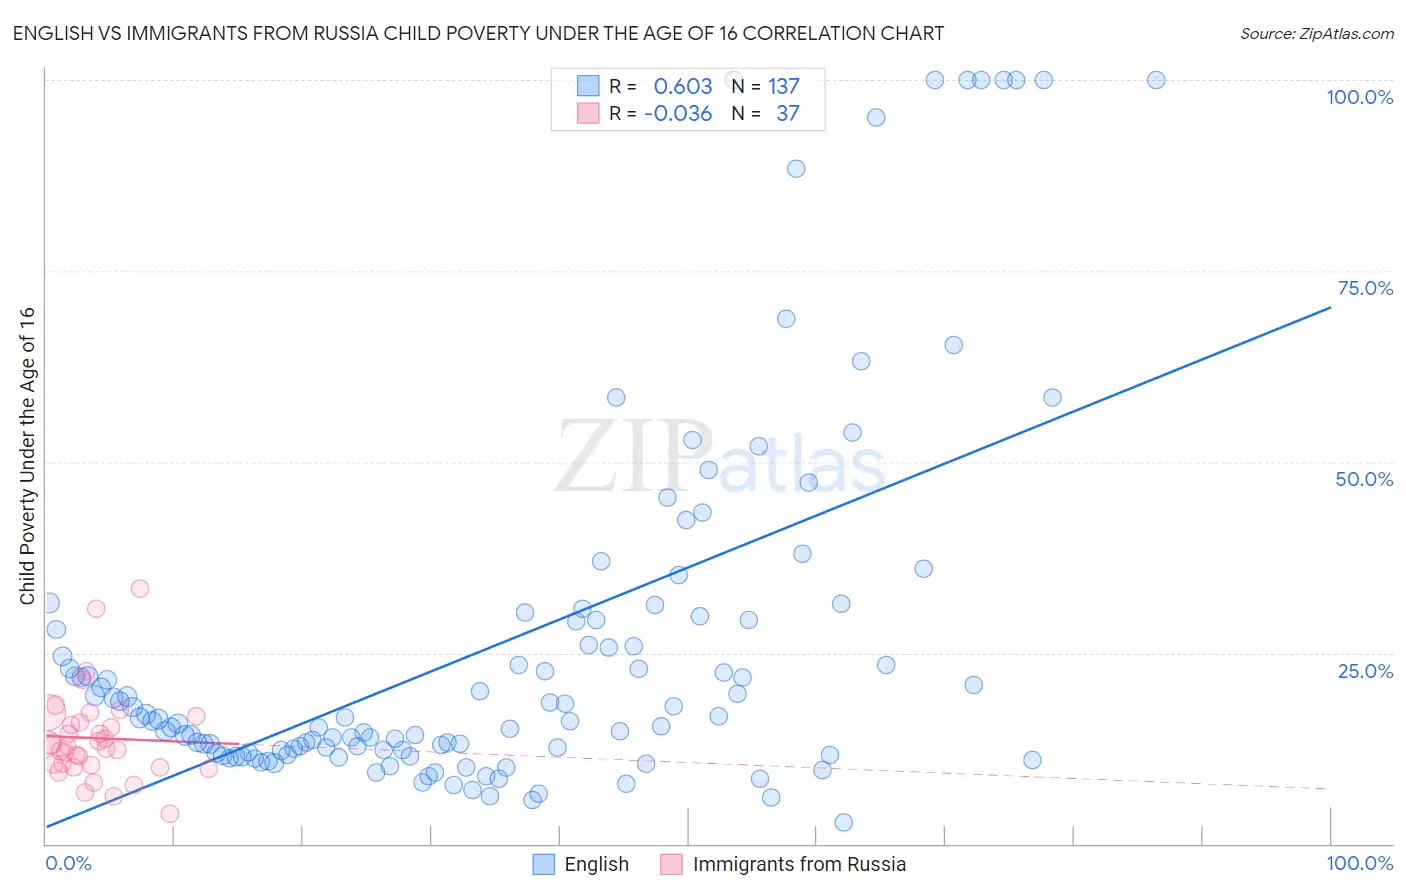 English vs Immigrants from Russia Child Poverty Under the Age of 16